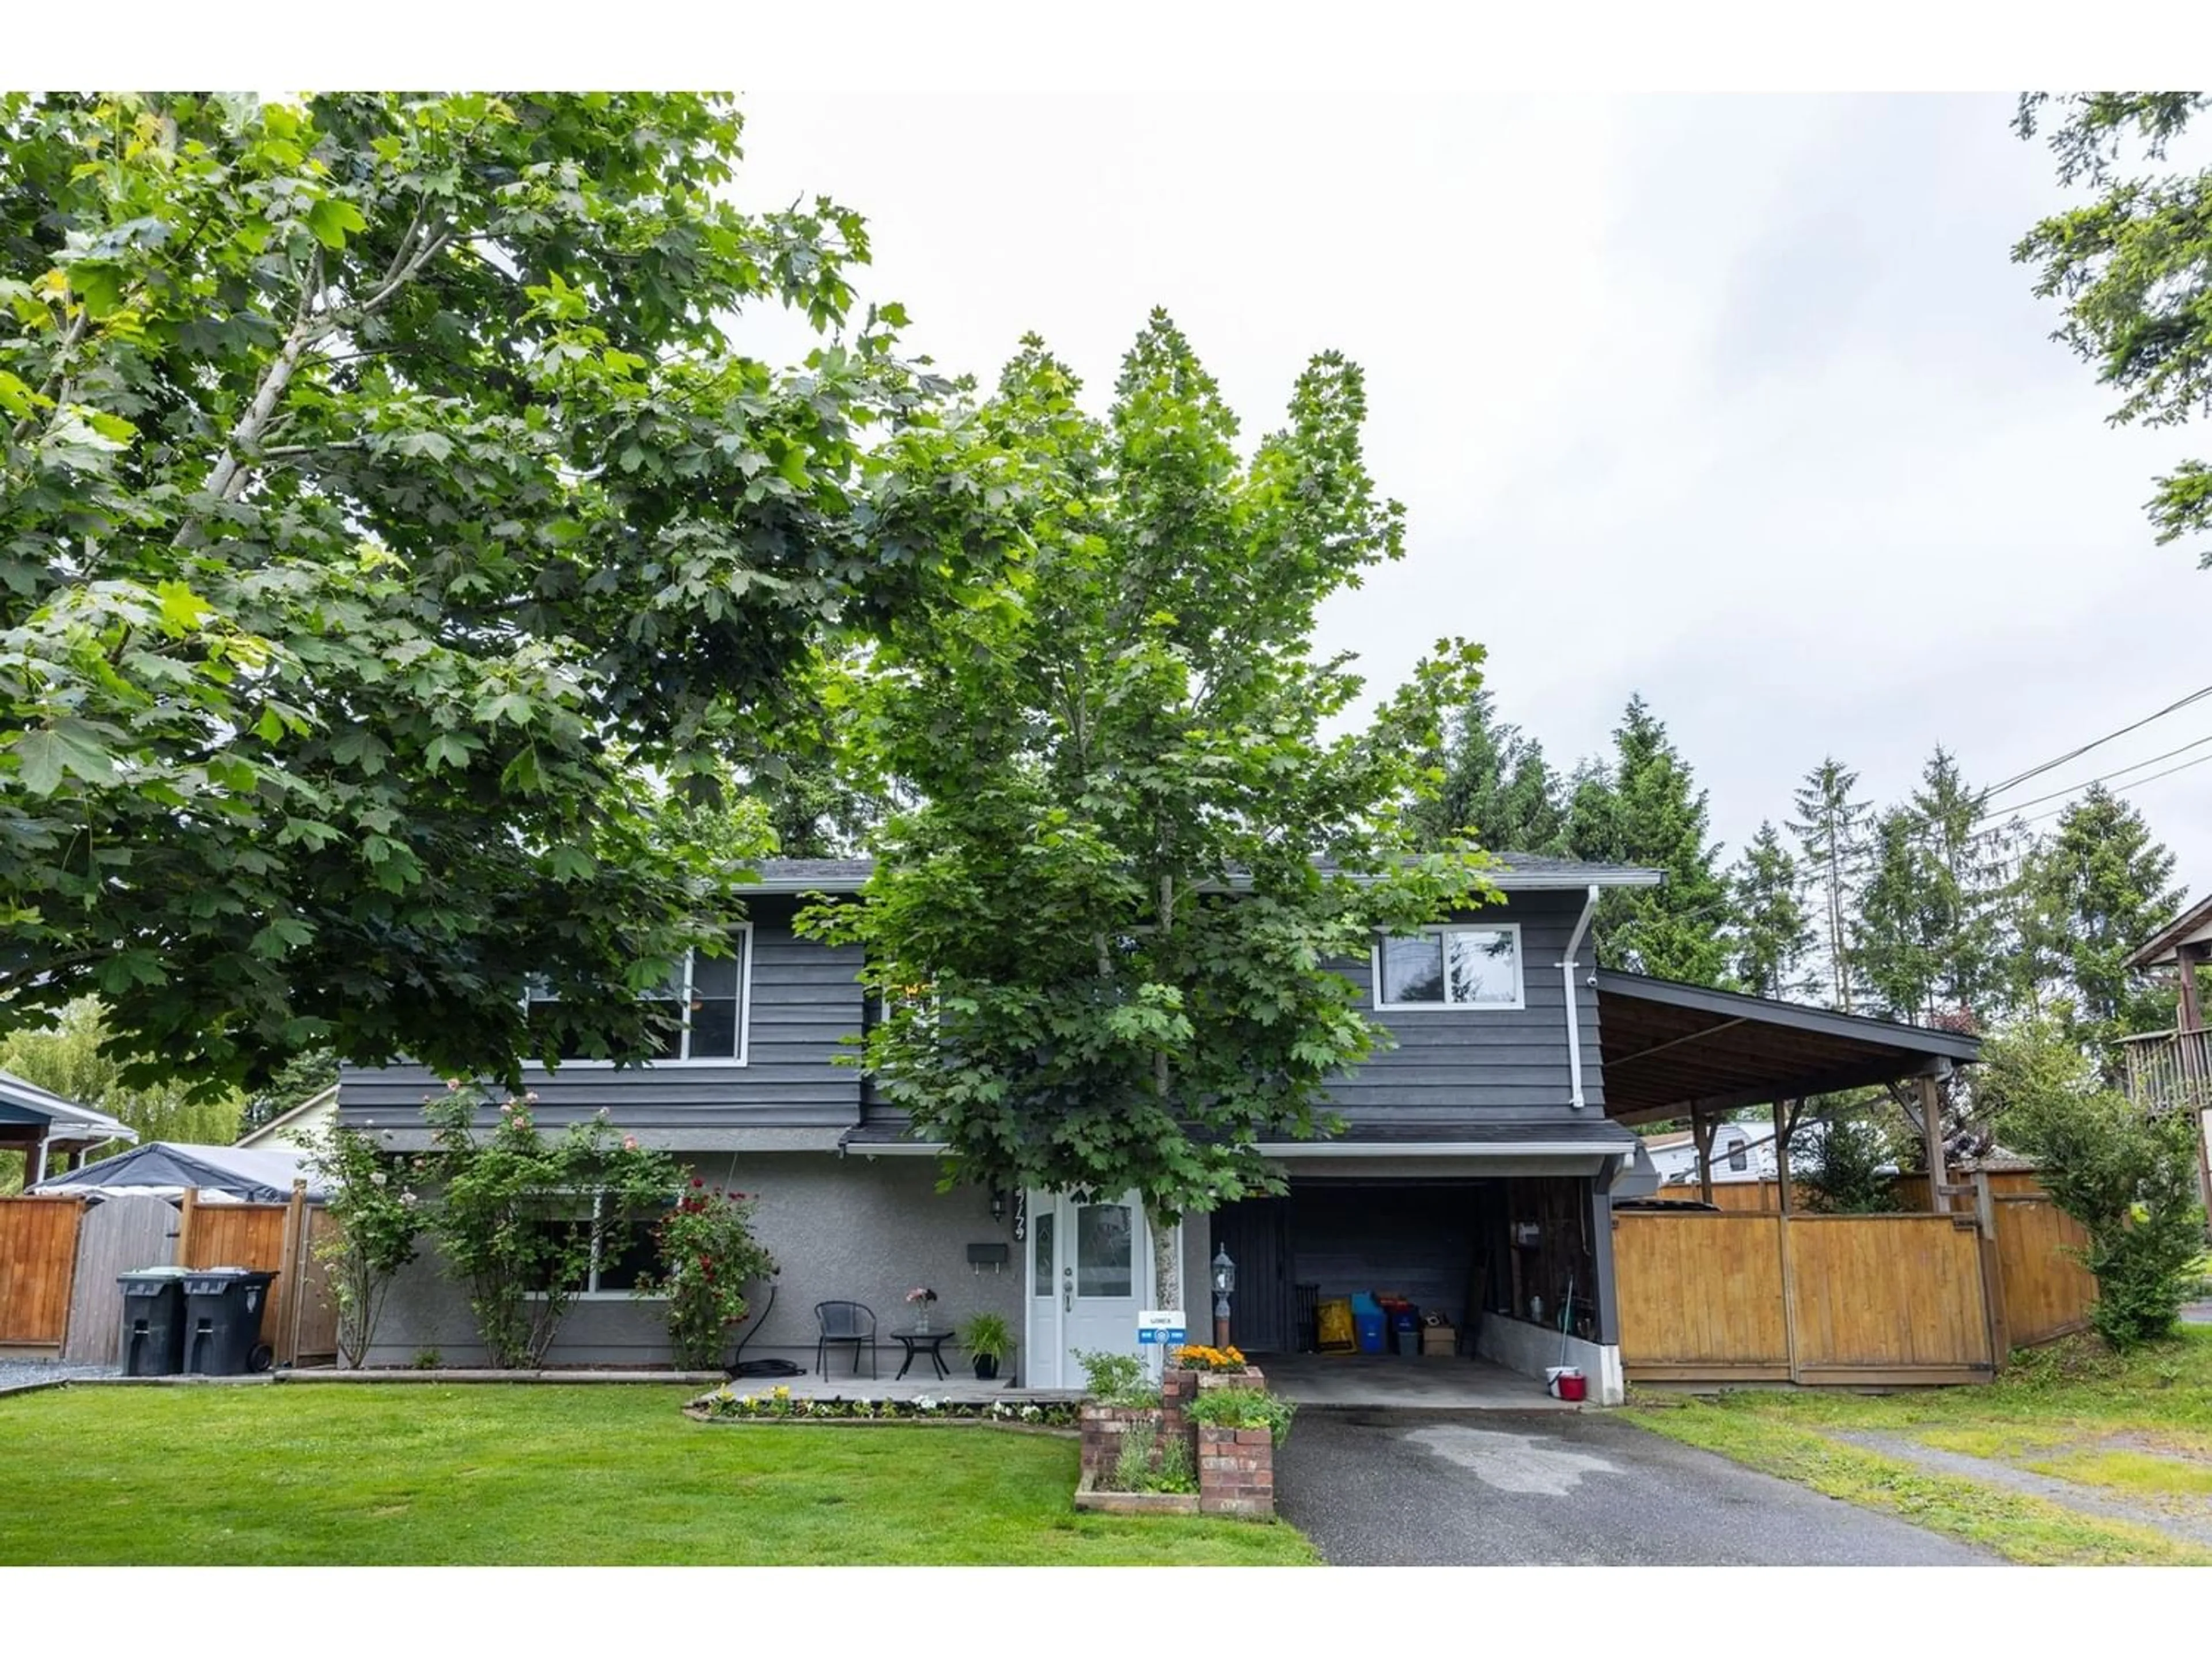 Frontside or backside of a home for 27179 28A AVENUE, Langley British Columbia V4W3A4